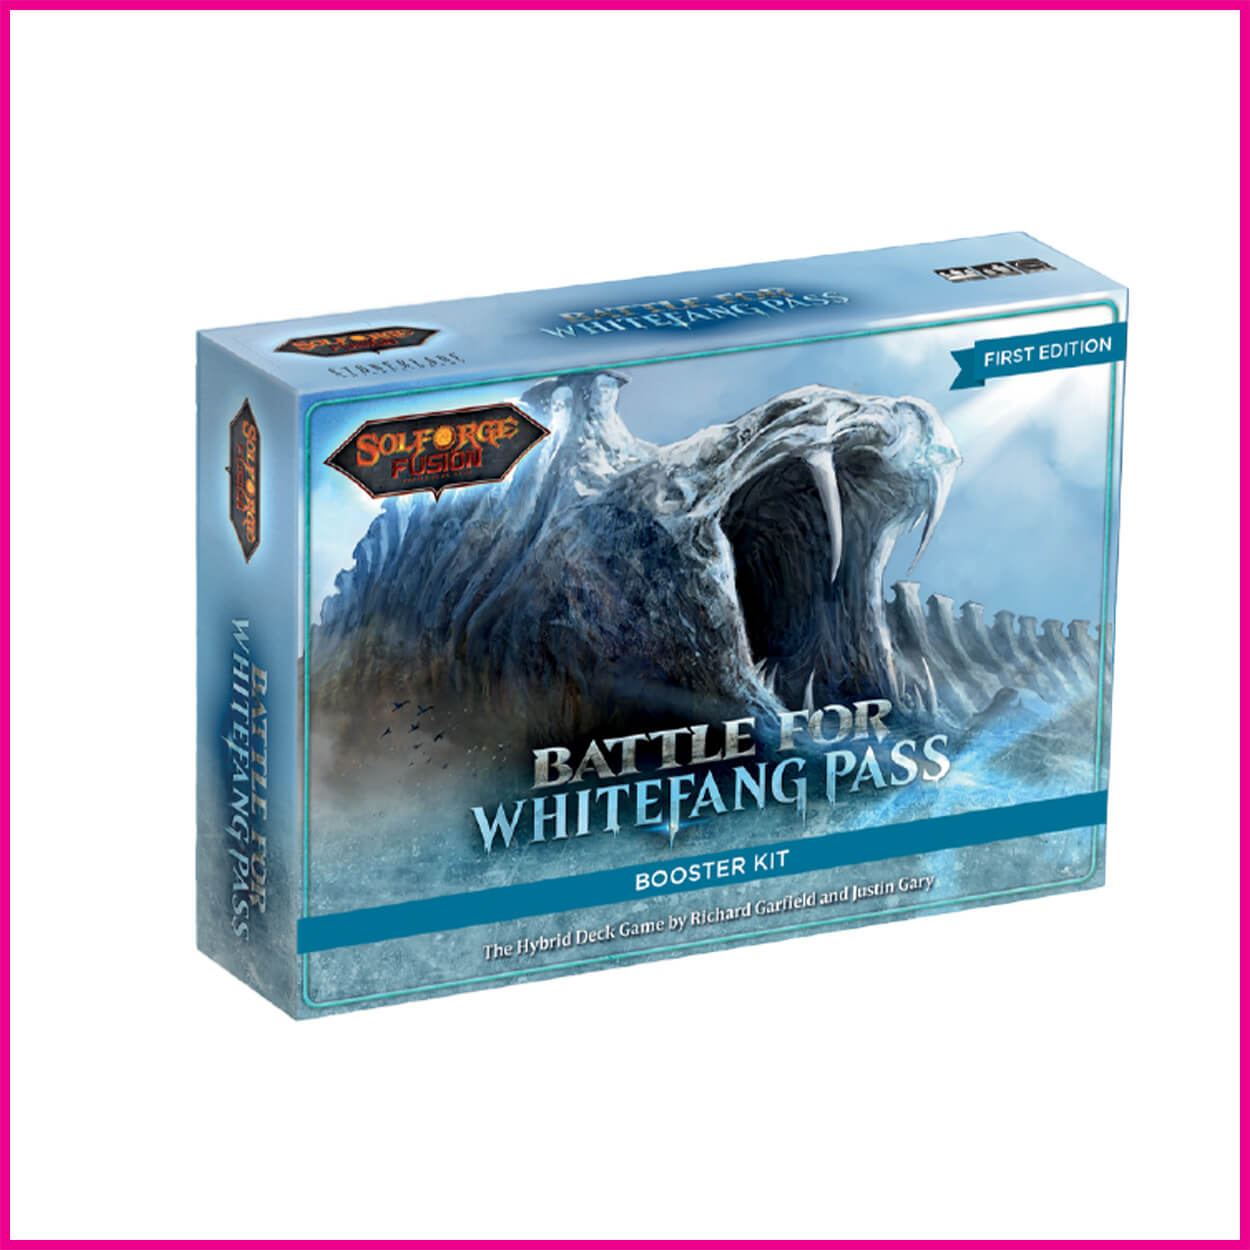 SolForge Fusion: Battle for Whitefang - Pass - Booster Kit